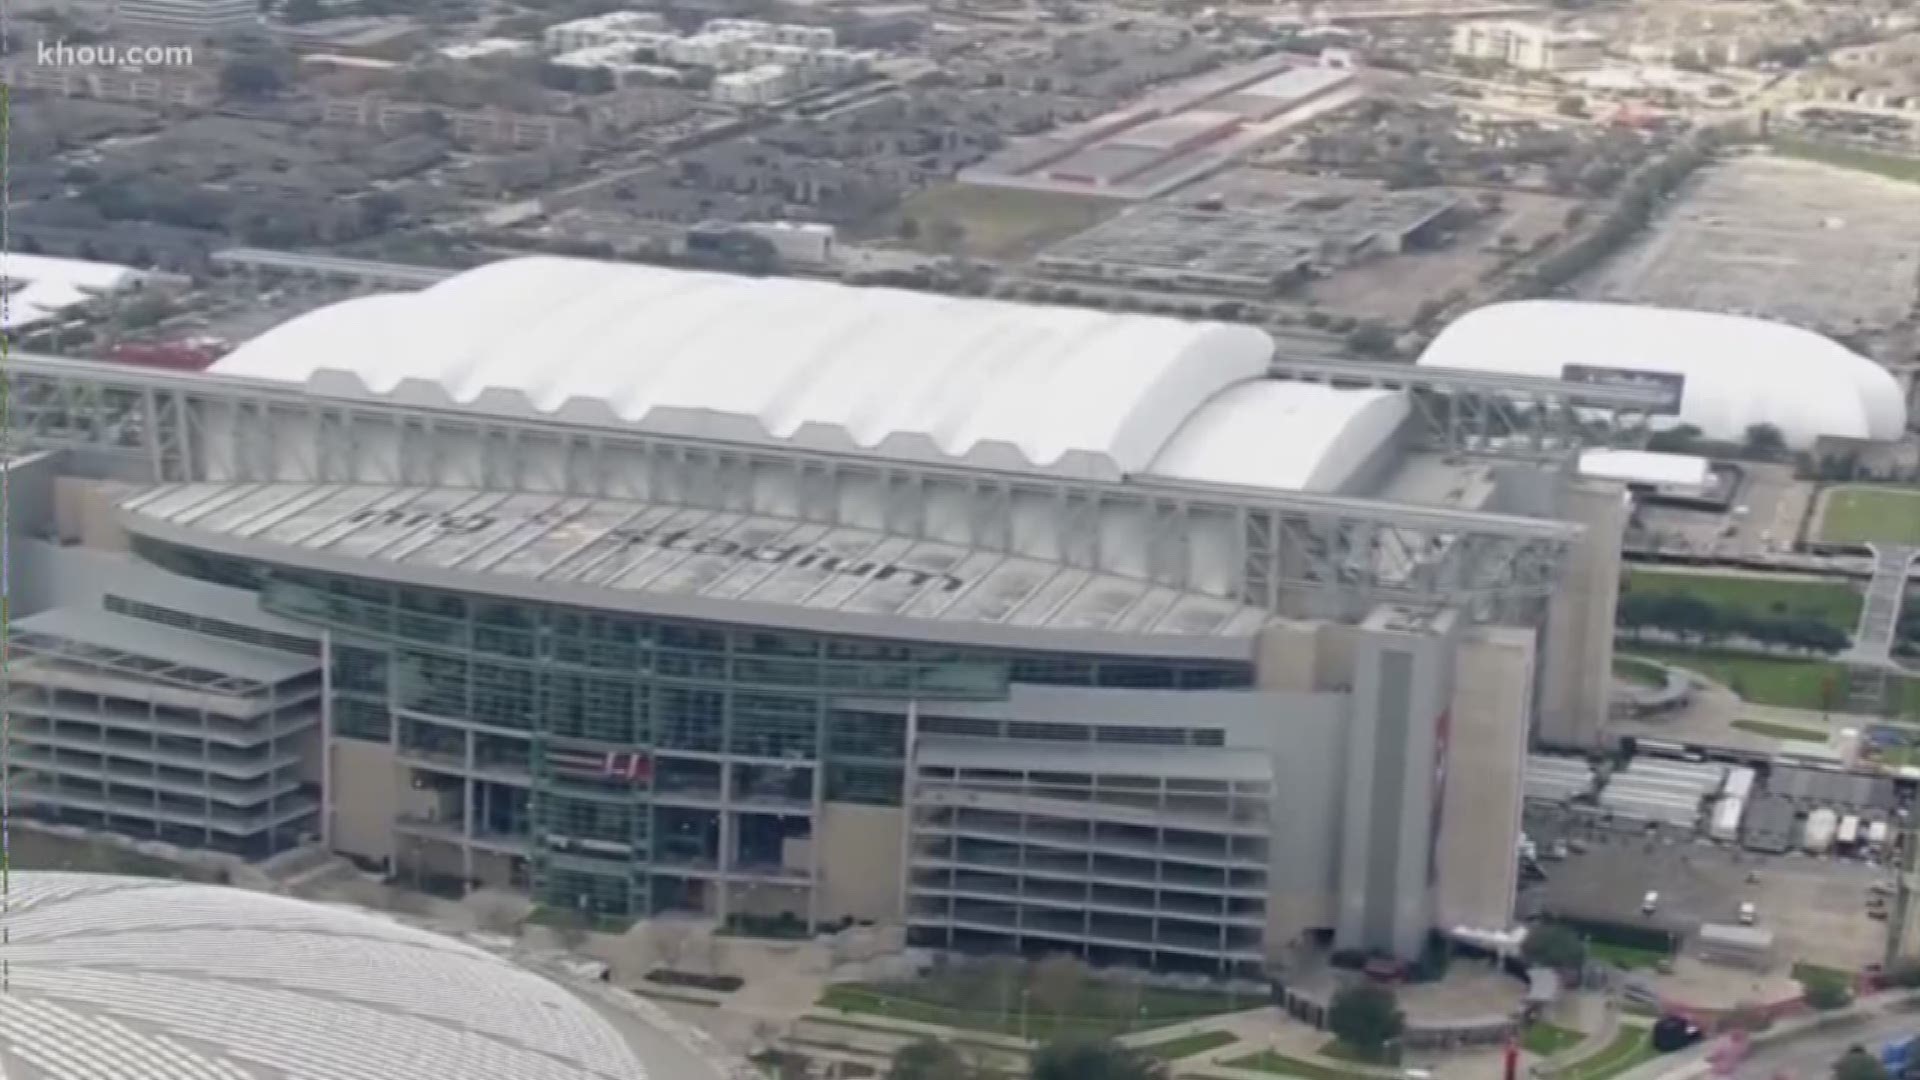 How does the Texans' home stadium compare to Atlanta's? KHOU 11 Sports Reporter Daniel Gotera compares the two.